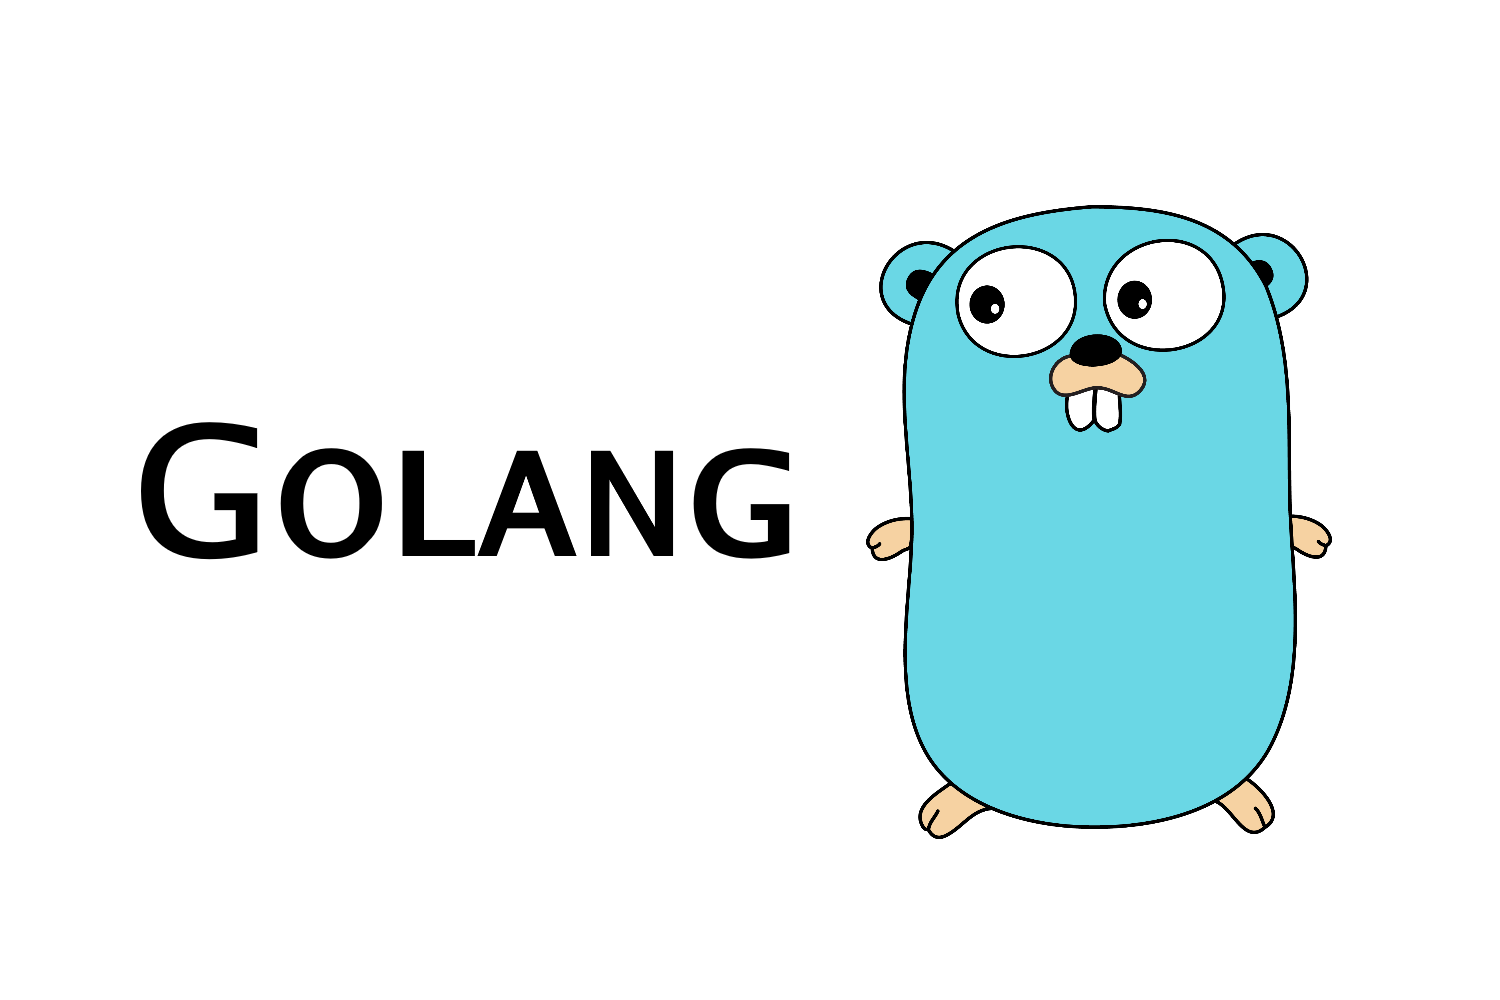 How Golang is thriving in the software industry